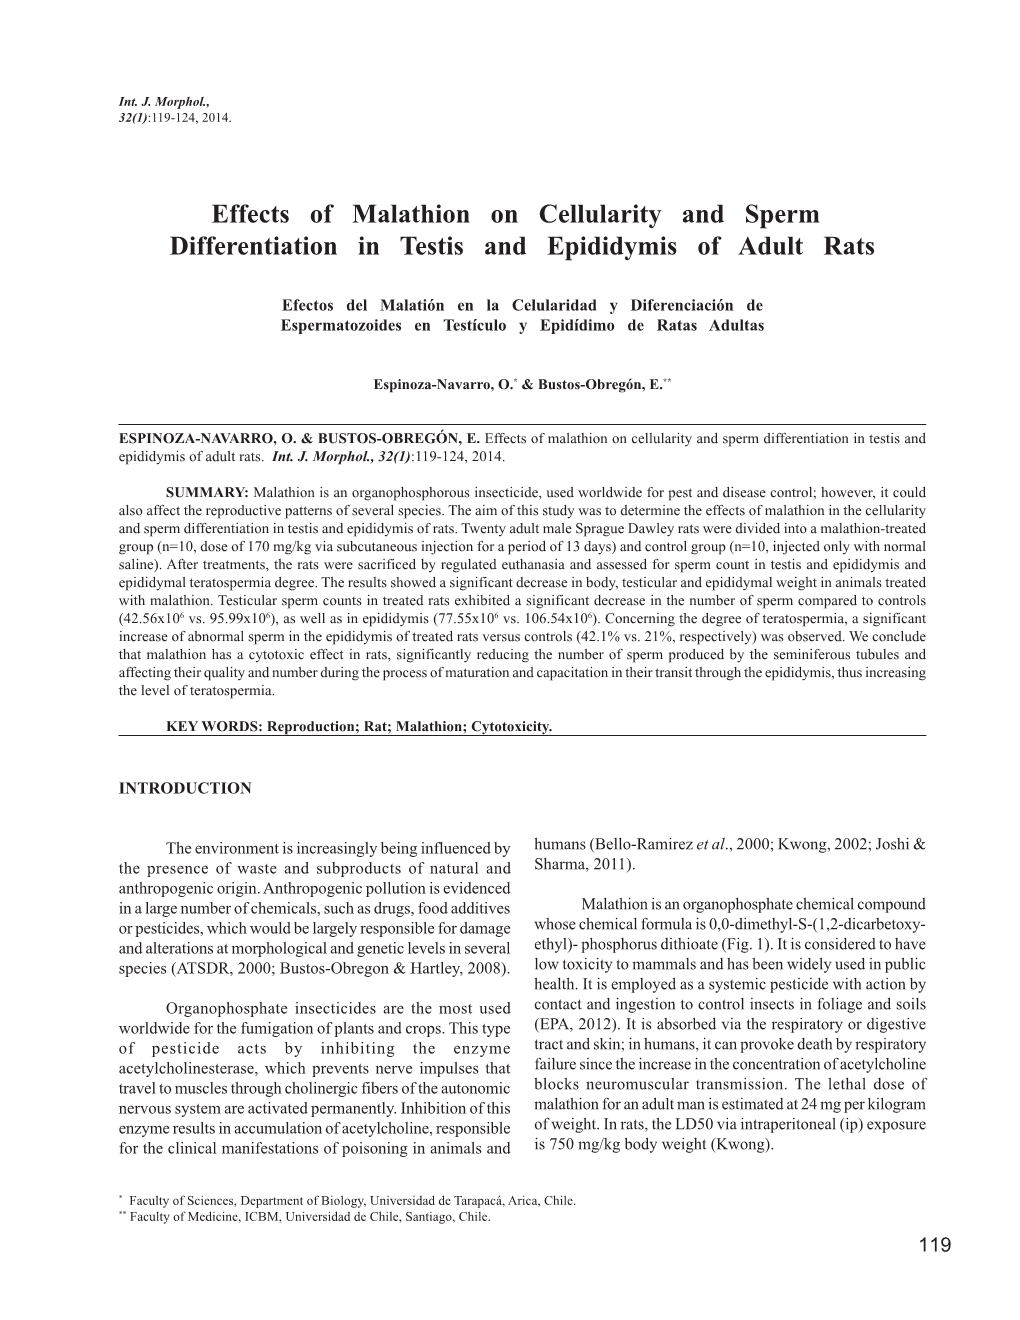 Effects of Malathion on Cellularity and Sperm Differentiation in Testis and Epididymis of Adult Rats